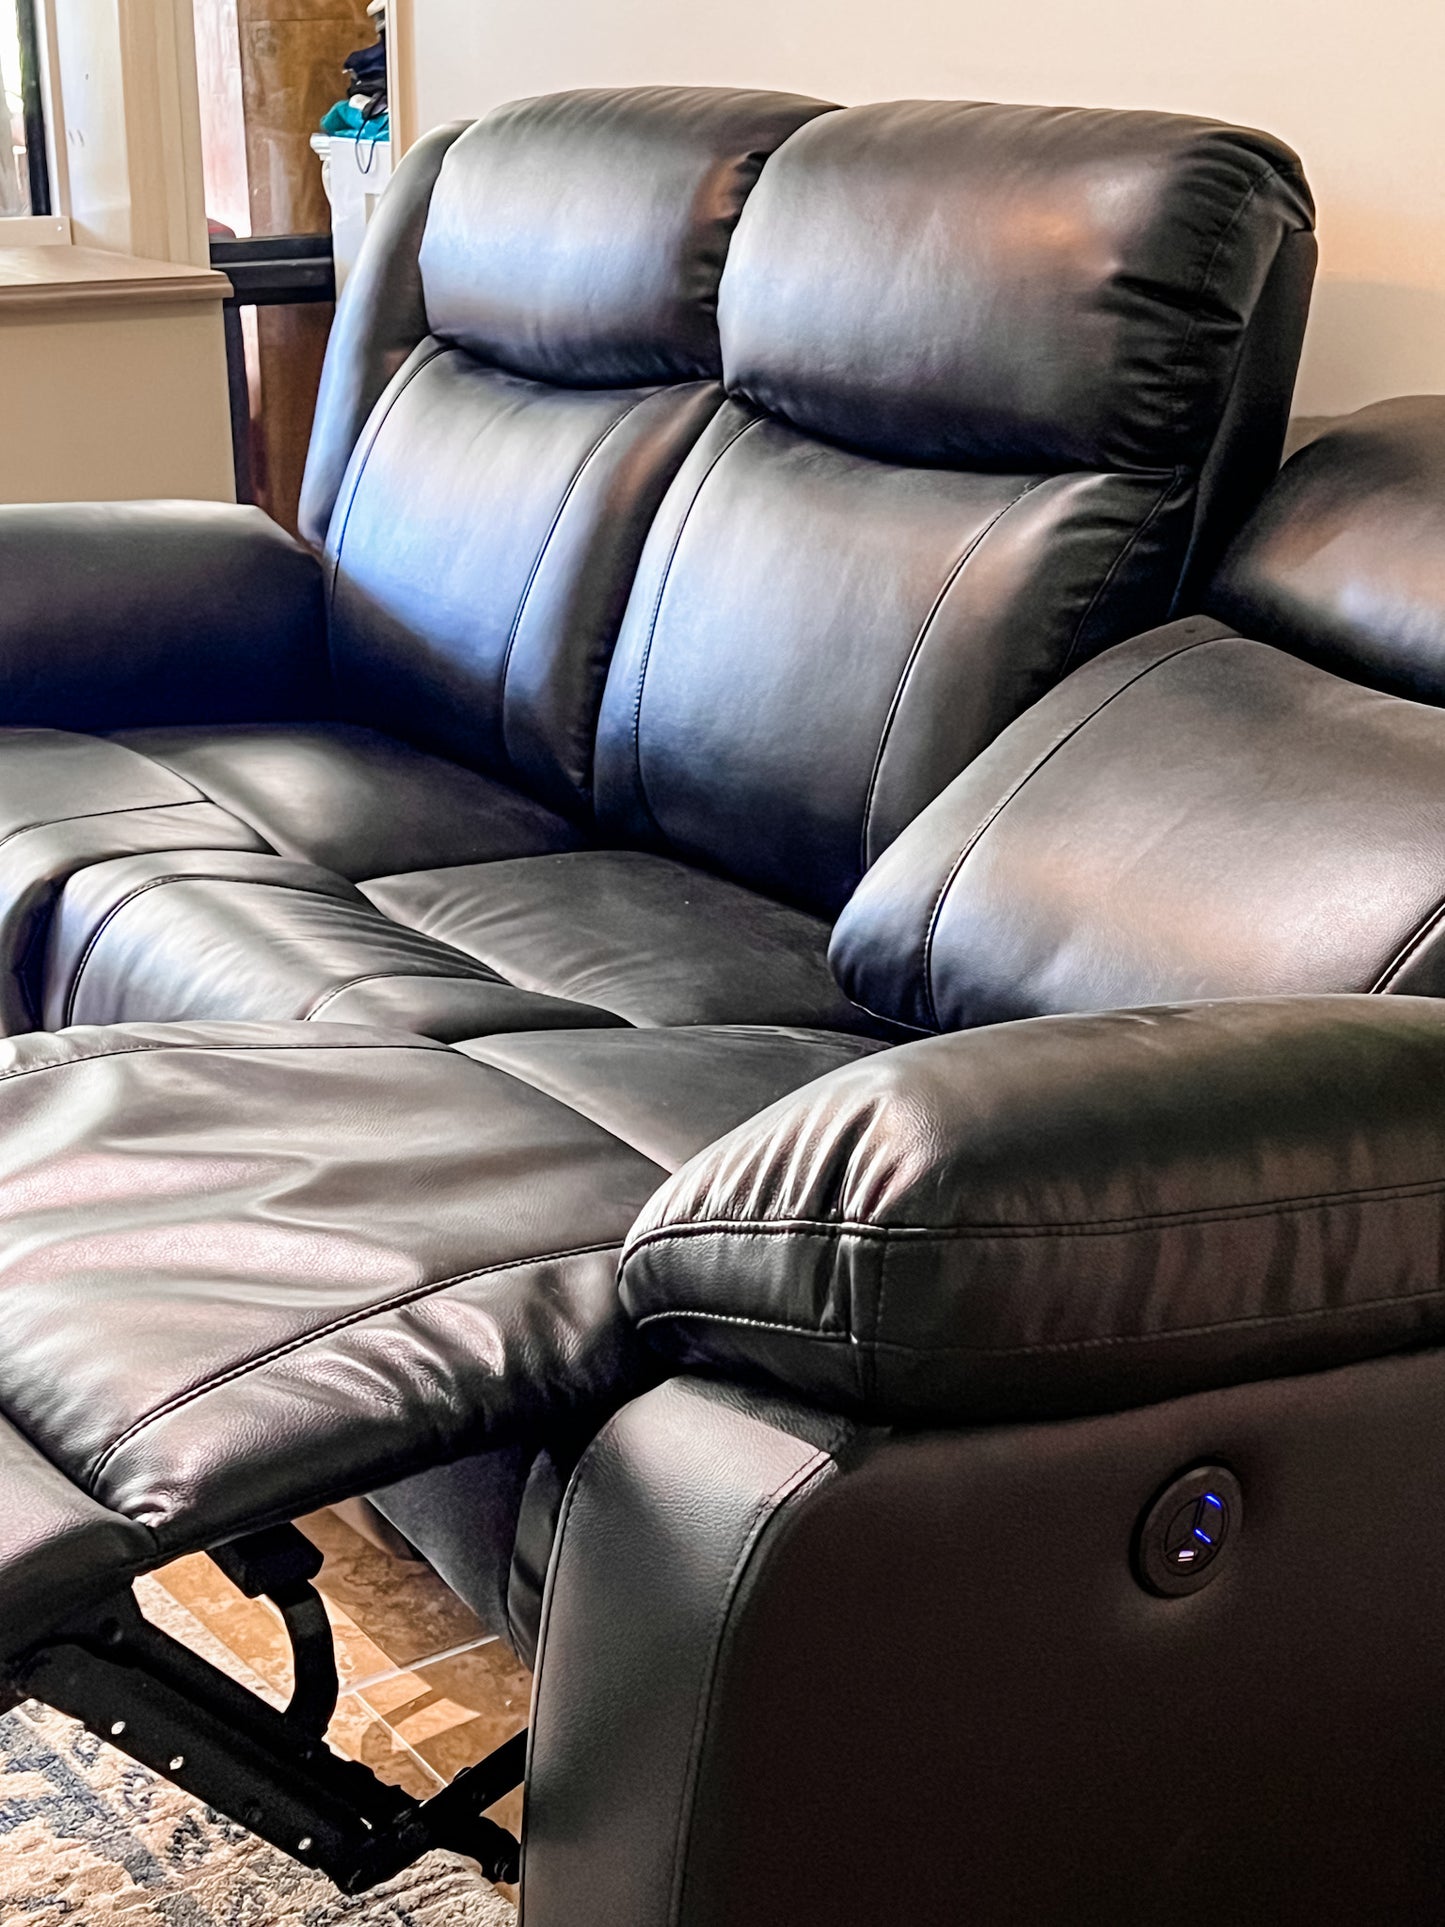 Full Cinema Couch Set - 3 Seater, 2 Seater. 1 Seater